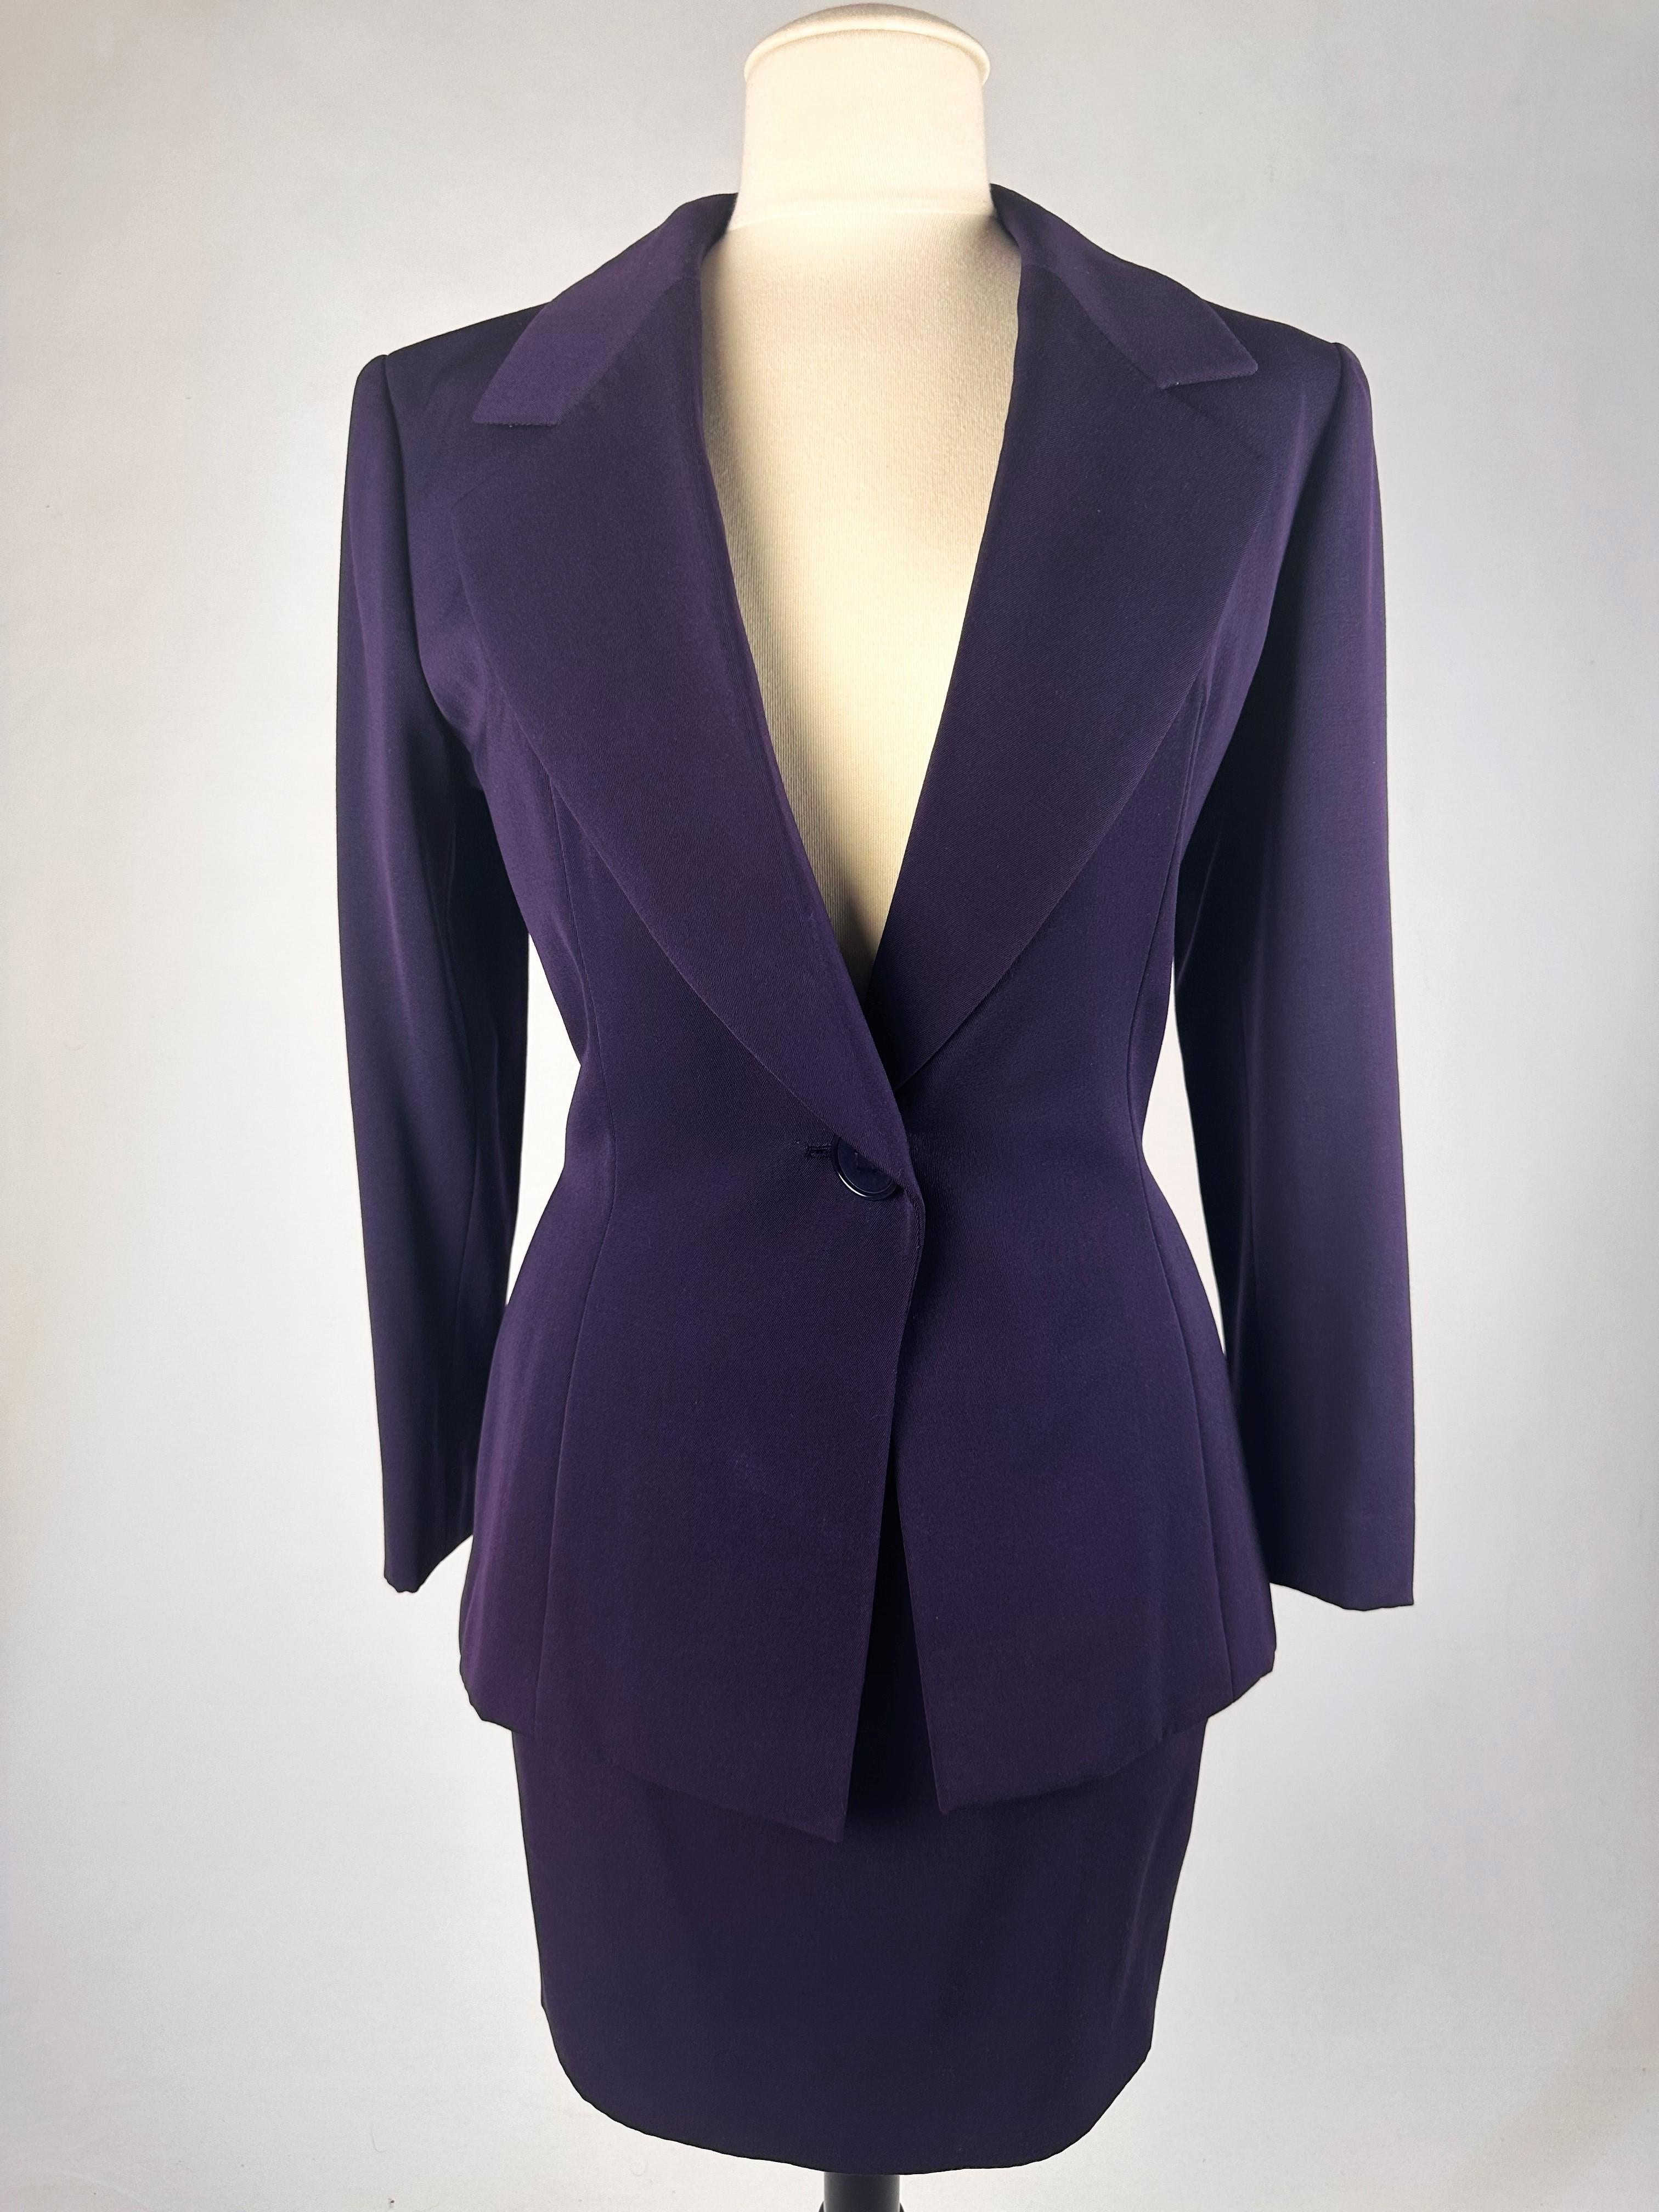 Circa 1990-1995

France

Haute couture skirt suit by Gianfranco Ferré for Christian Dior dating from the 1990s. Tuxedo jacket and fitted skirt in cardinal purple wool twill. Hip-length fitted jacket with large shawl collar closed and crossed at the